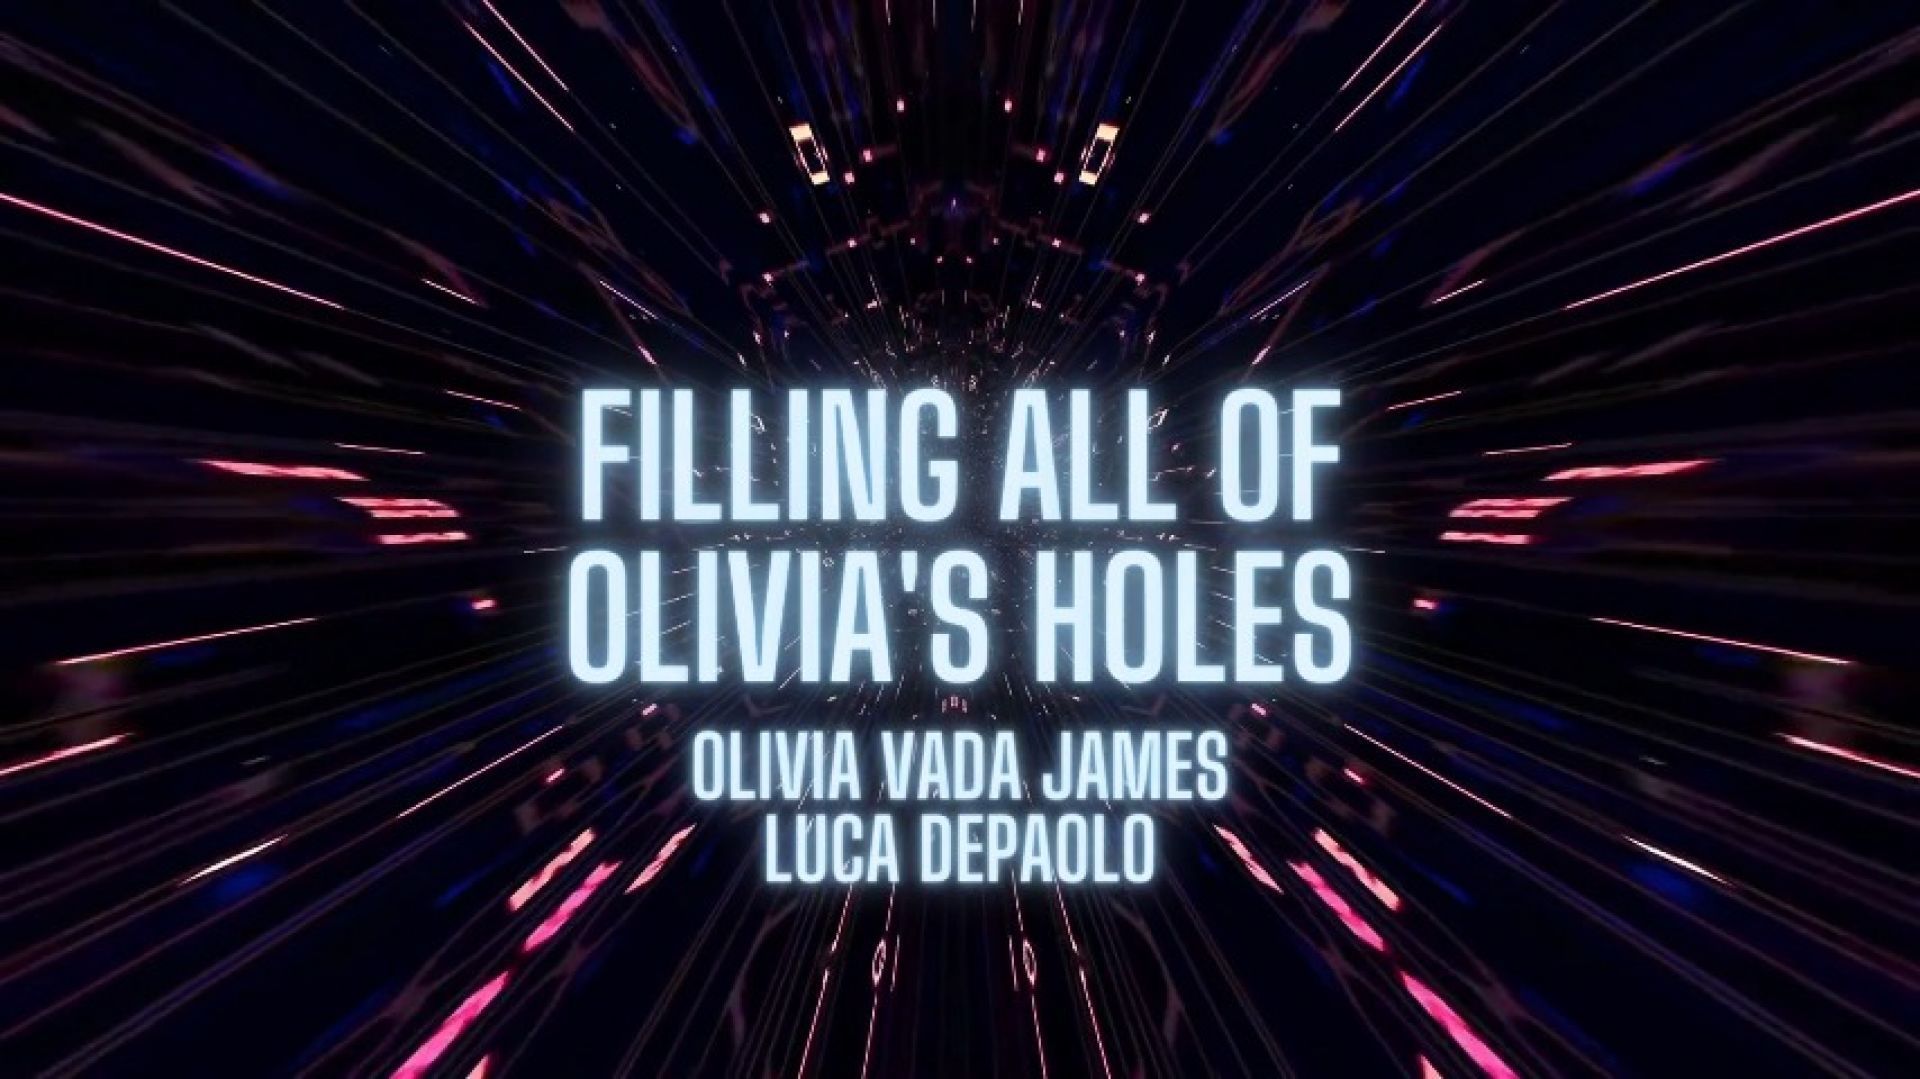 Filling All of Olivia's Holes